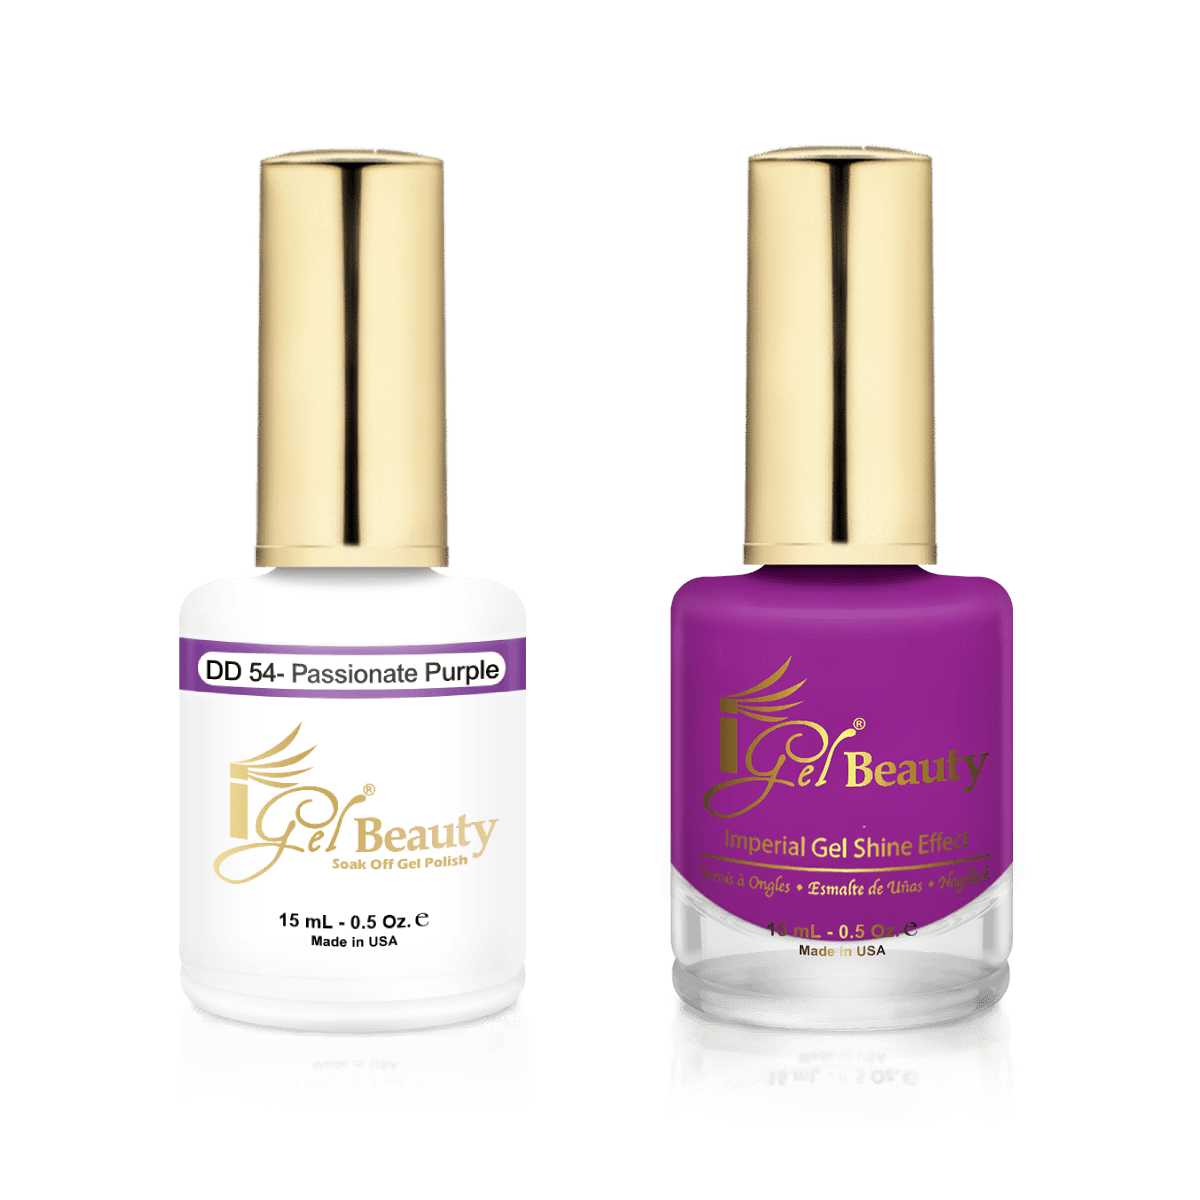 IGel Duo Gel Polish + Matching Nail Lacquer DD 54 PASSIONATE PURPLE